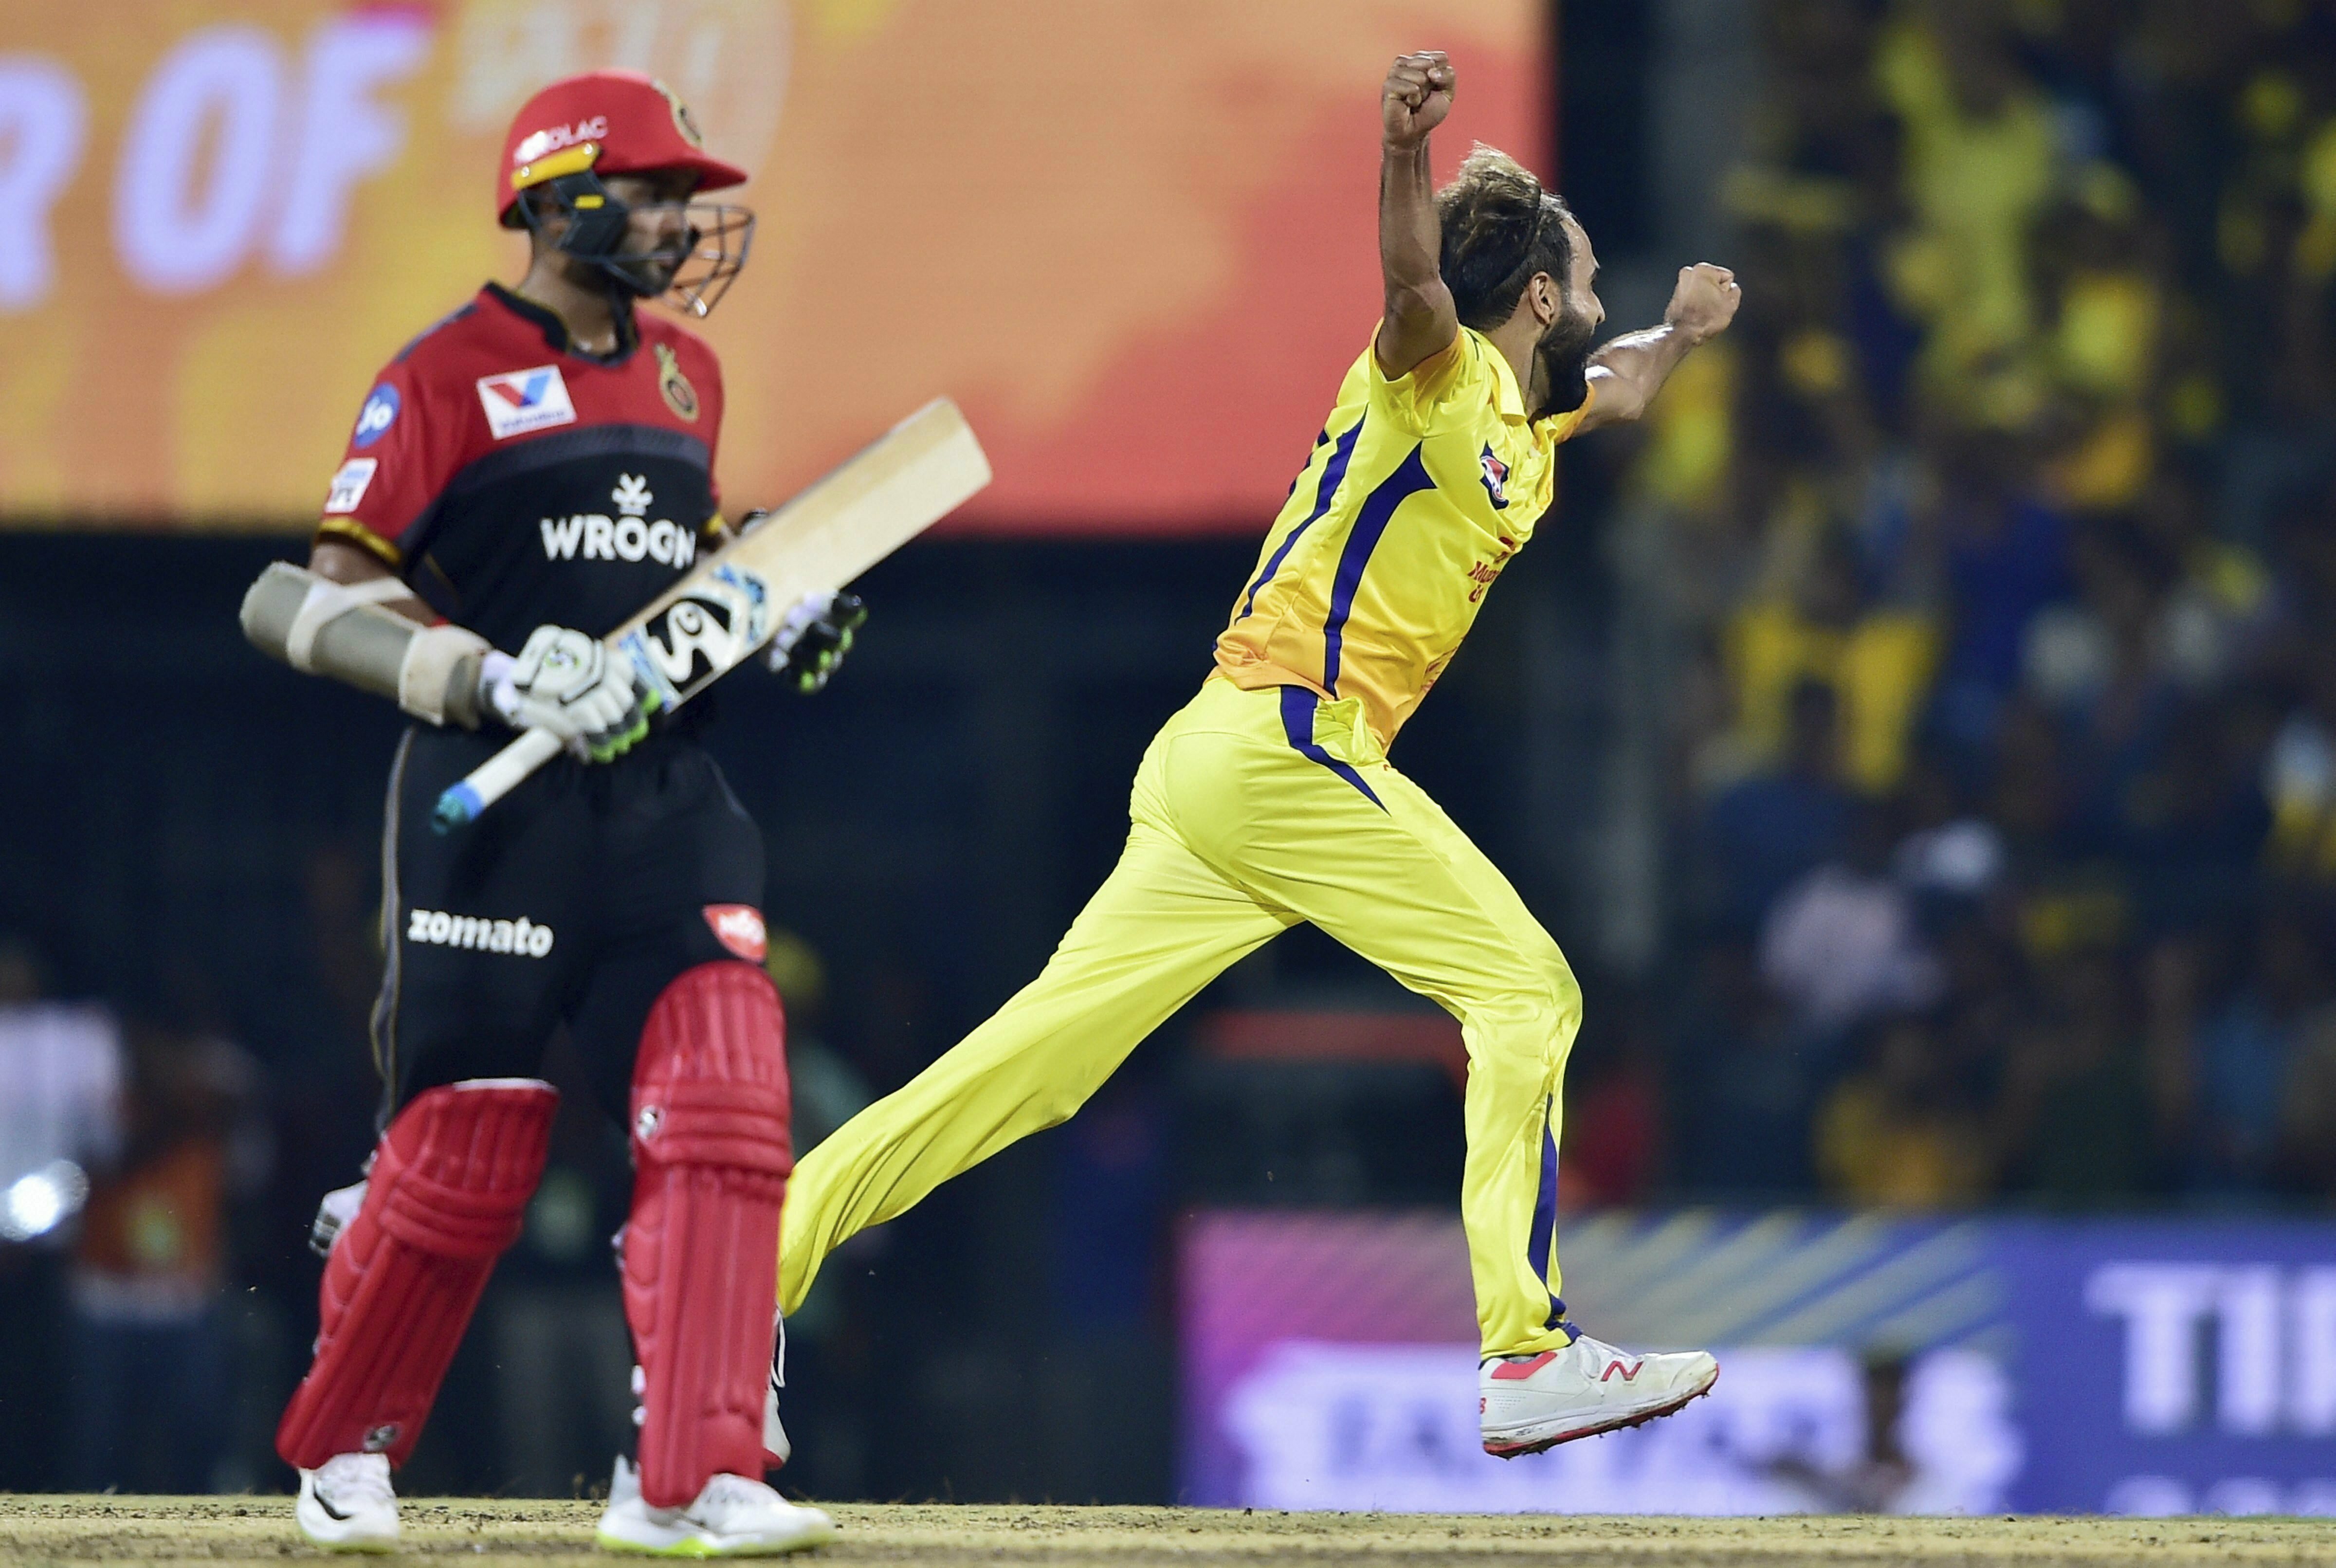 Chennai Super Kings' Imran Tahir celebrates the wicket of Royal Challengers Bangalore' Navdeep Saini during the first match of the 12th edition of the Indian Premier League 2019 T20 cricket tournament at MAC Stadium in Chennai - PTI